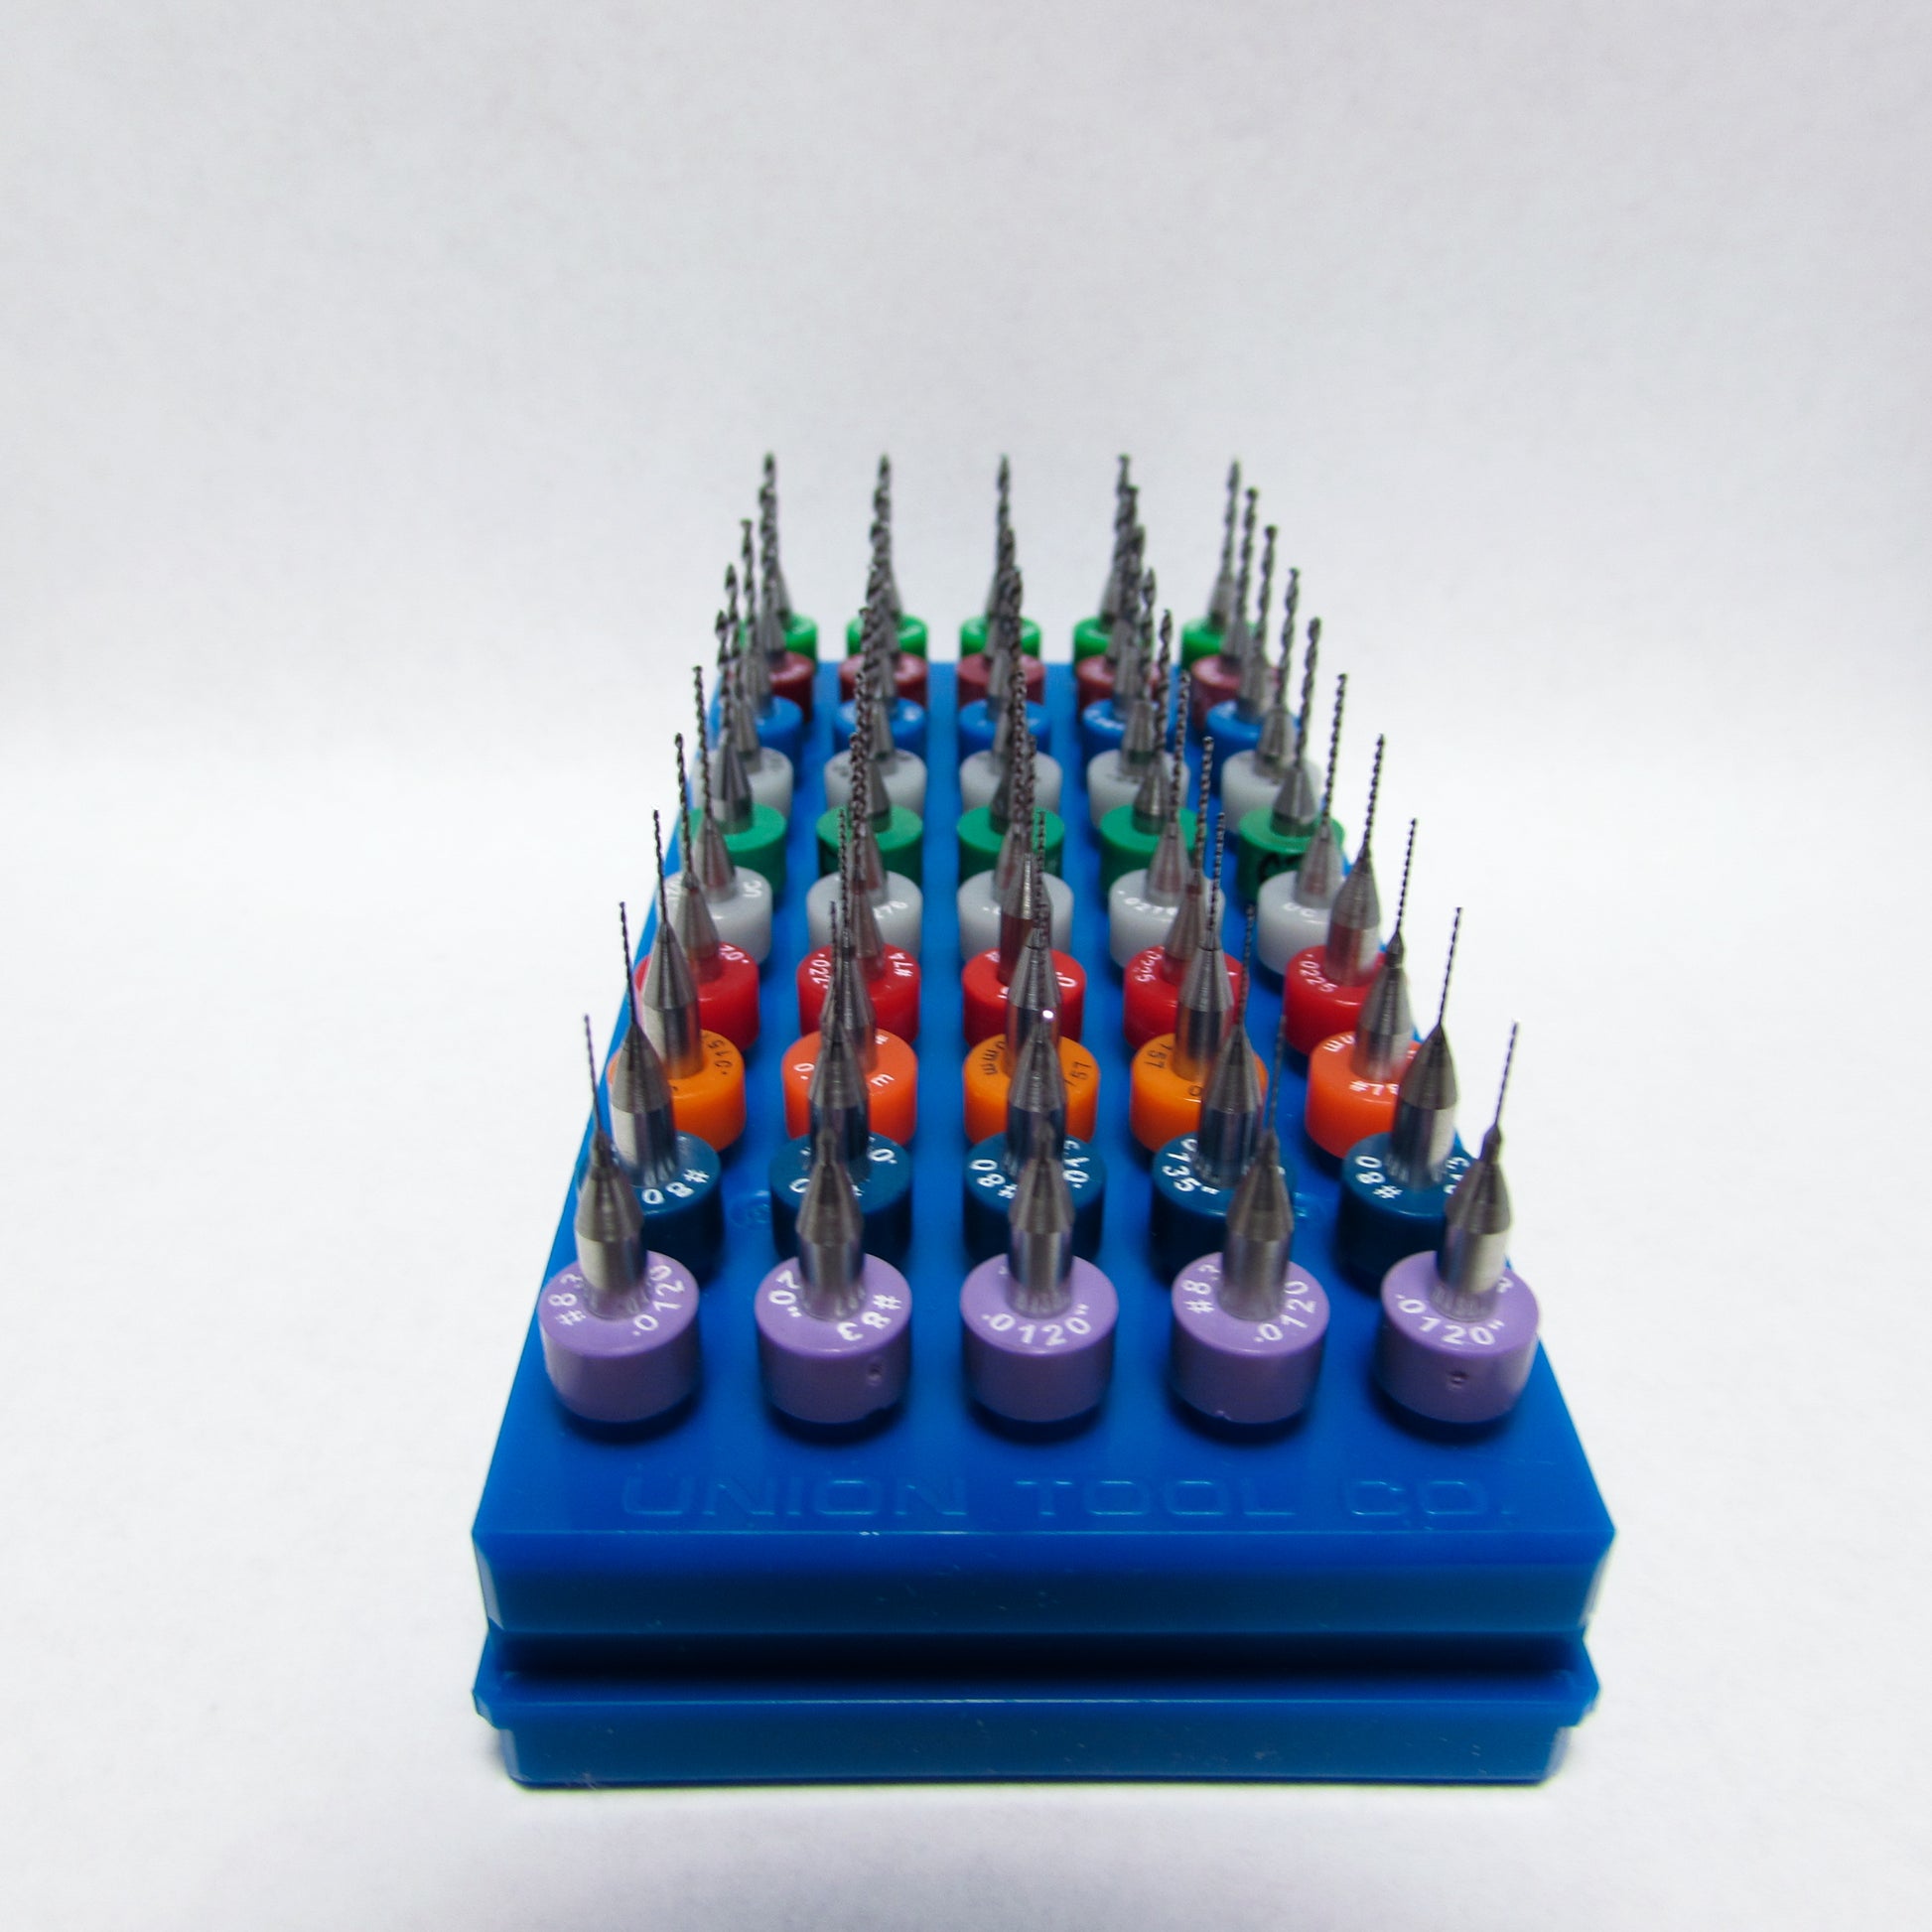 Micro Size Carbide Drill Bit Set Ten Sizes - 5 pcs each: #83, #80, #78, #74, #70, #62, #59, #57, 1.15mm, 1.20mm from Drill Bits Unlimited